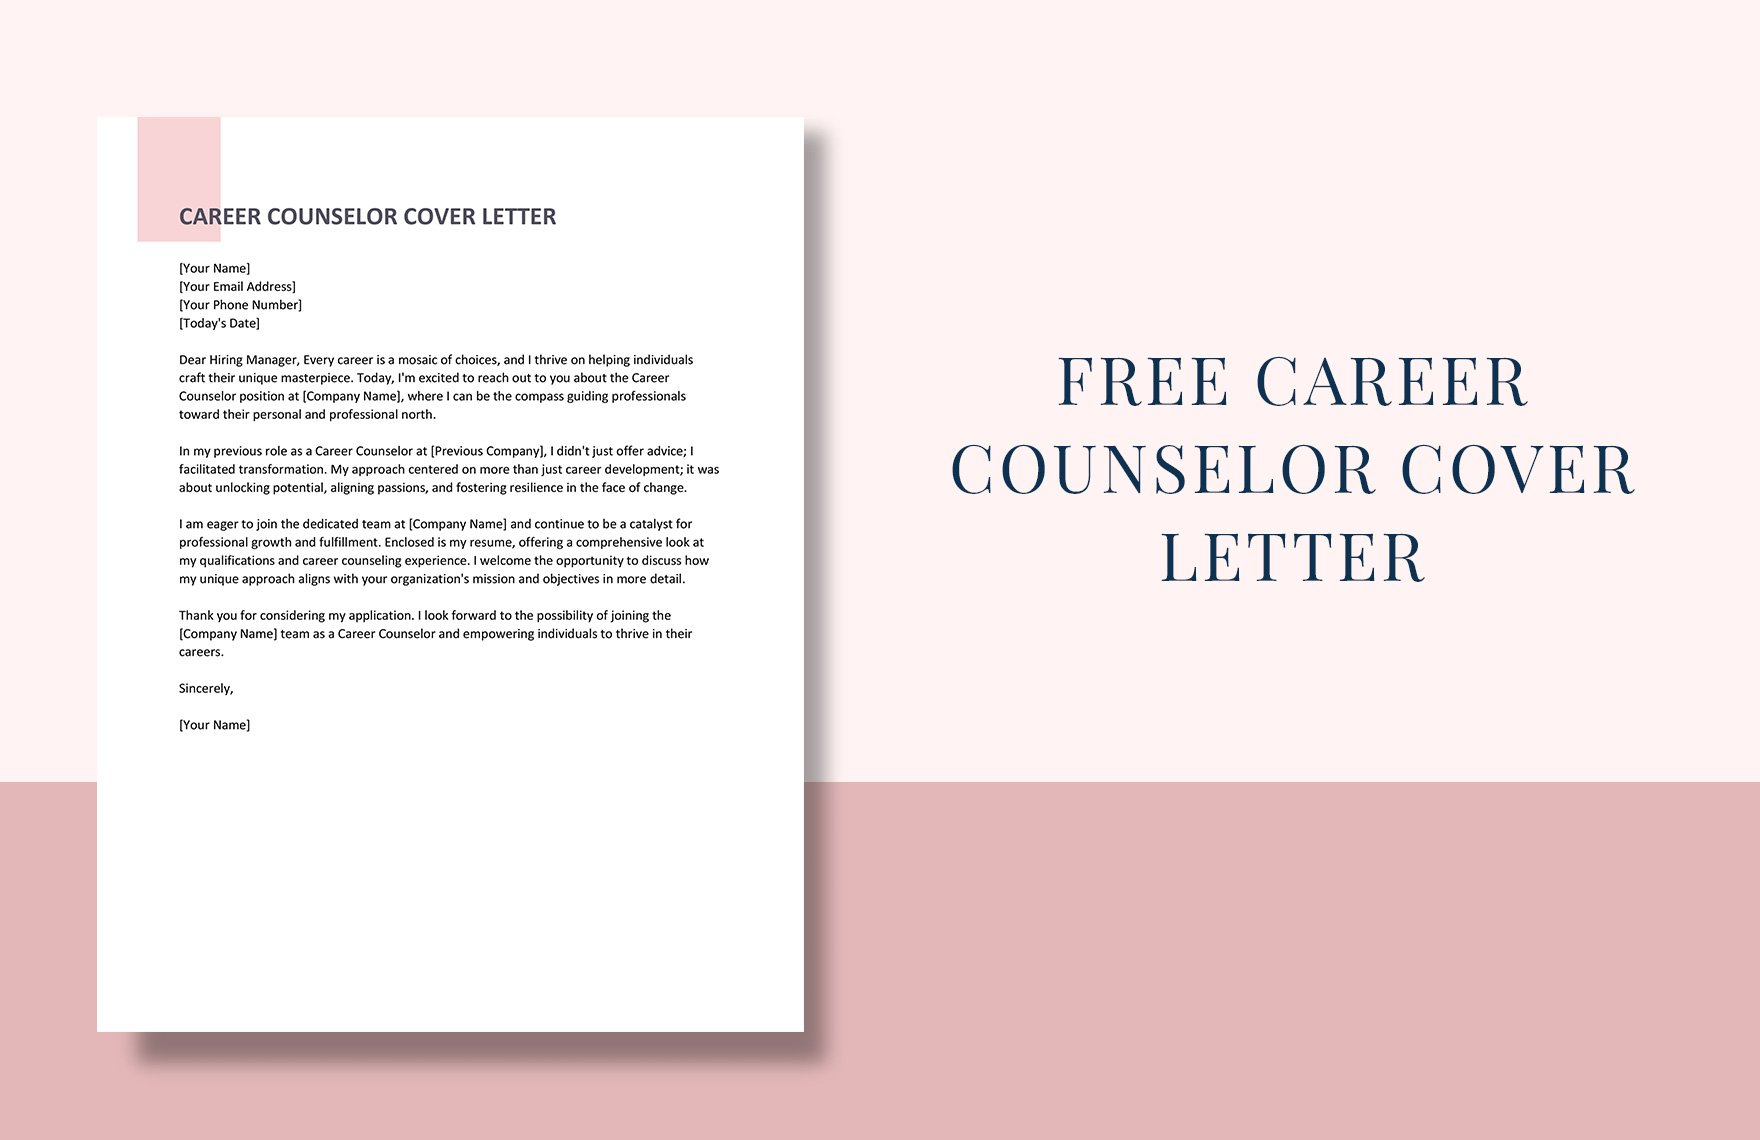 Career Counselor Cover Letter